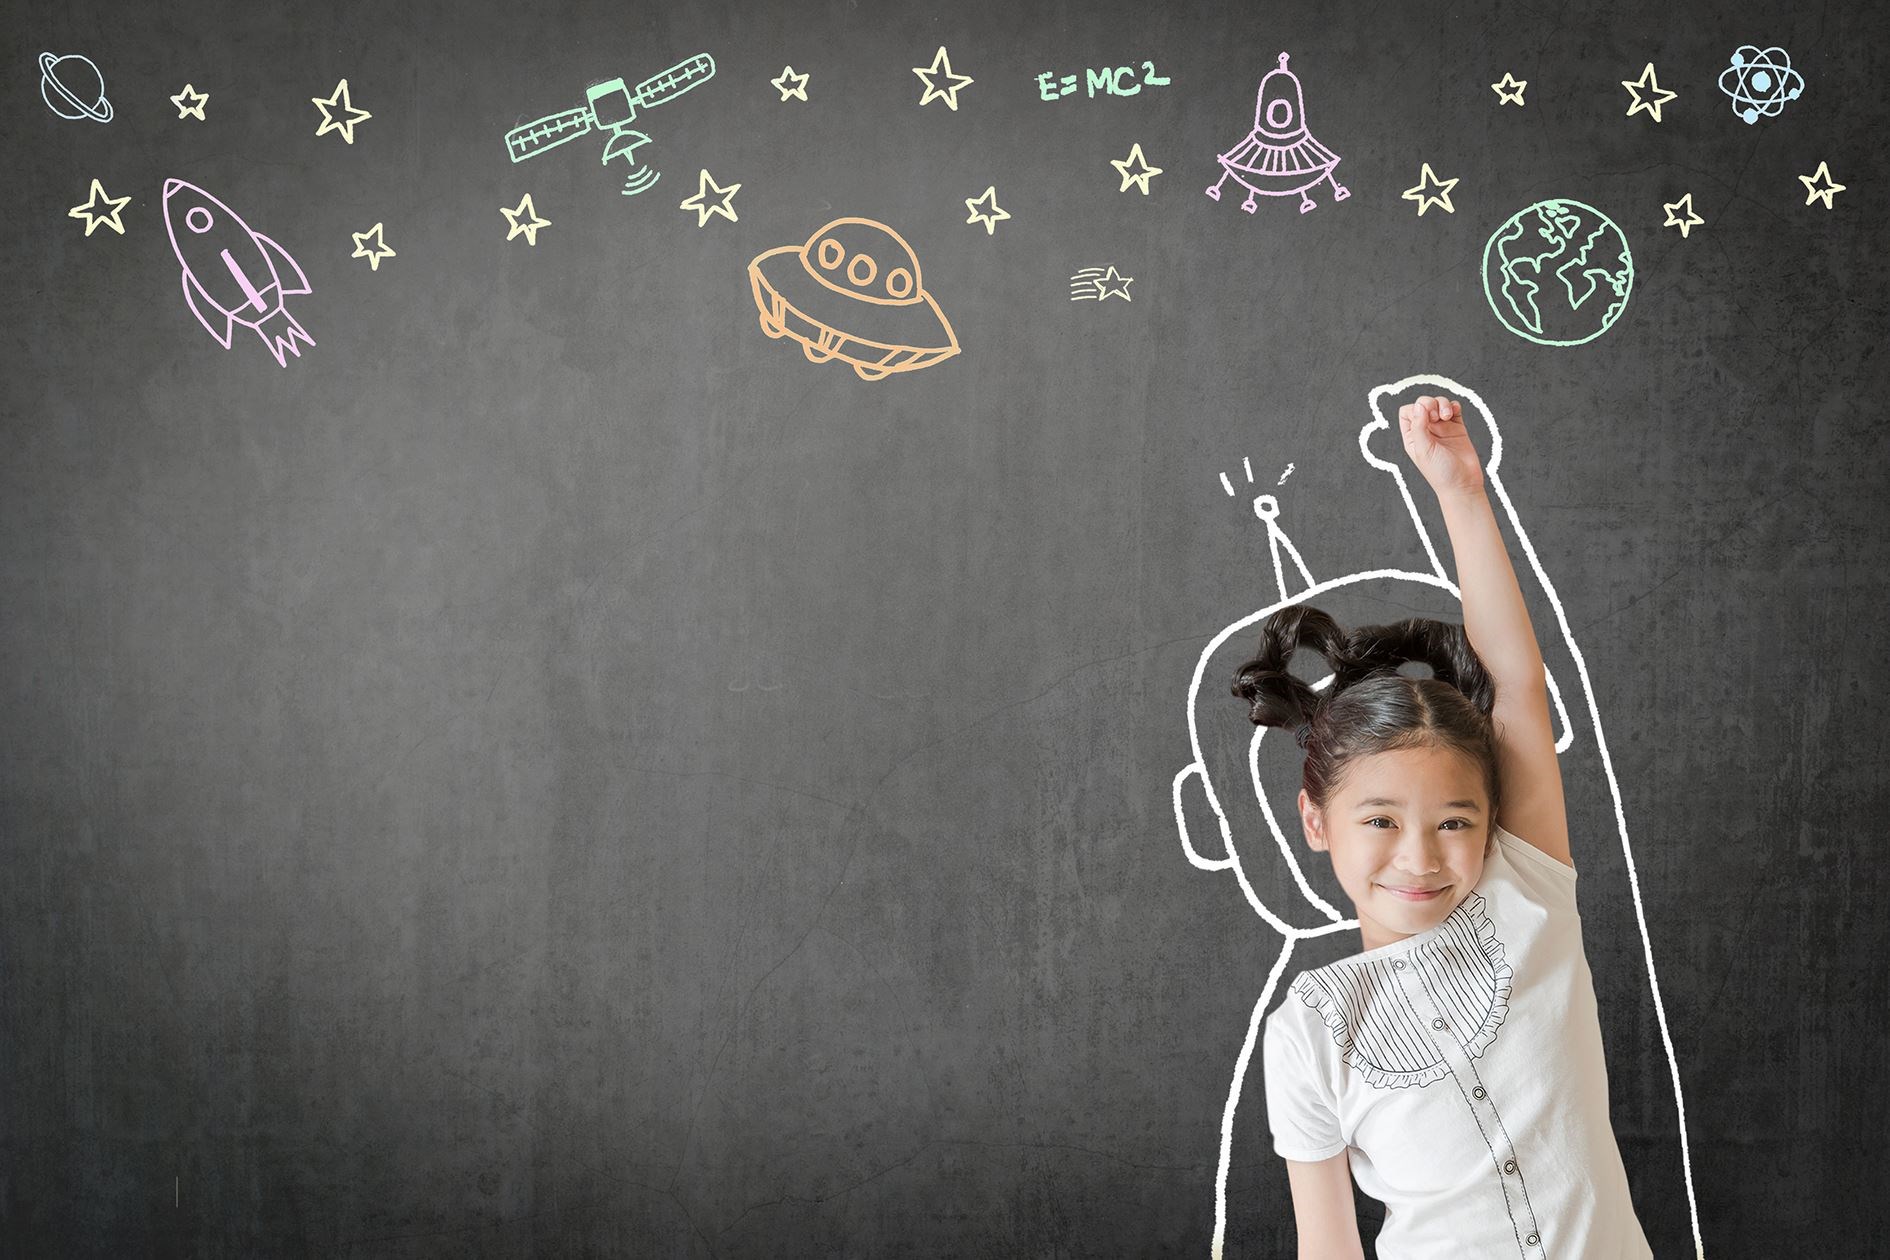 You are never too young to reach for the stars in science and maths.